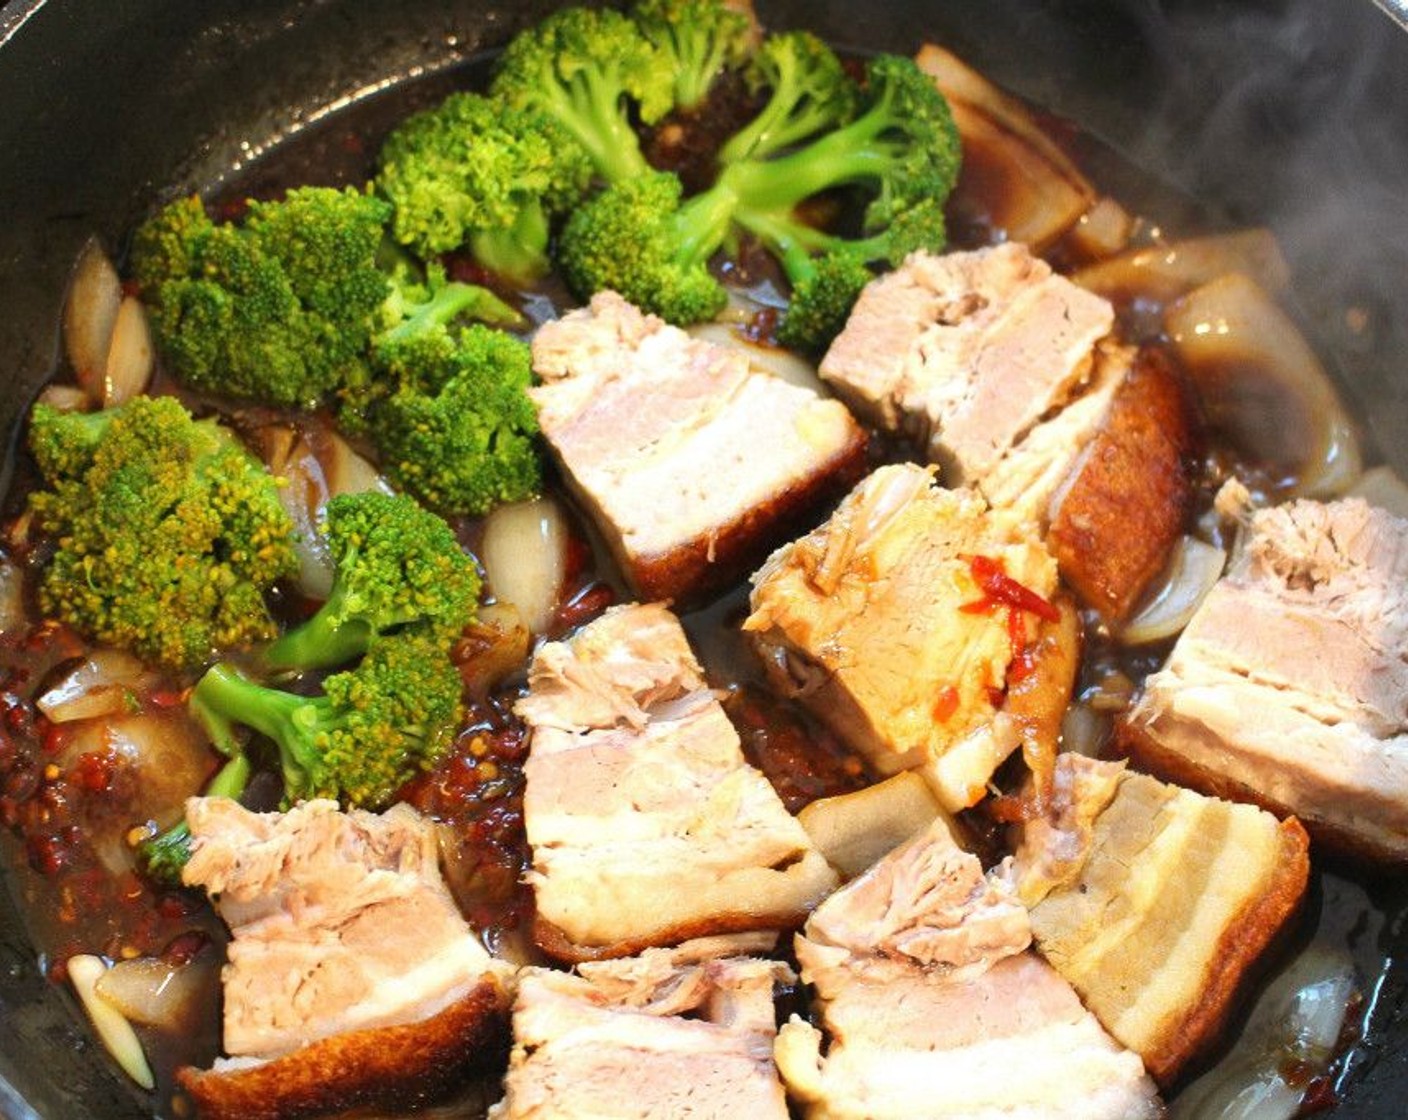 step 10 Add in pork belly and Broccoli Florets (2 cups). Simmer for 2 minutes while spooning the sauce over the meat and vegetables.